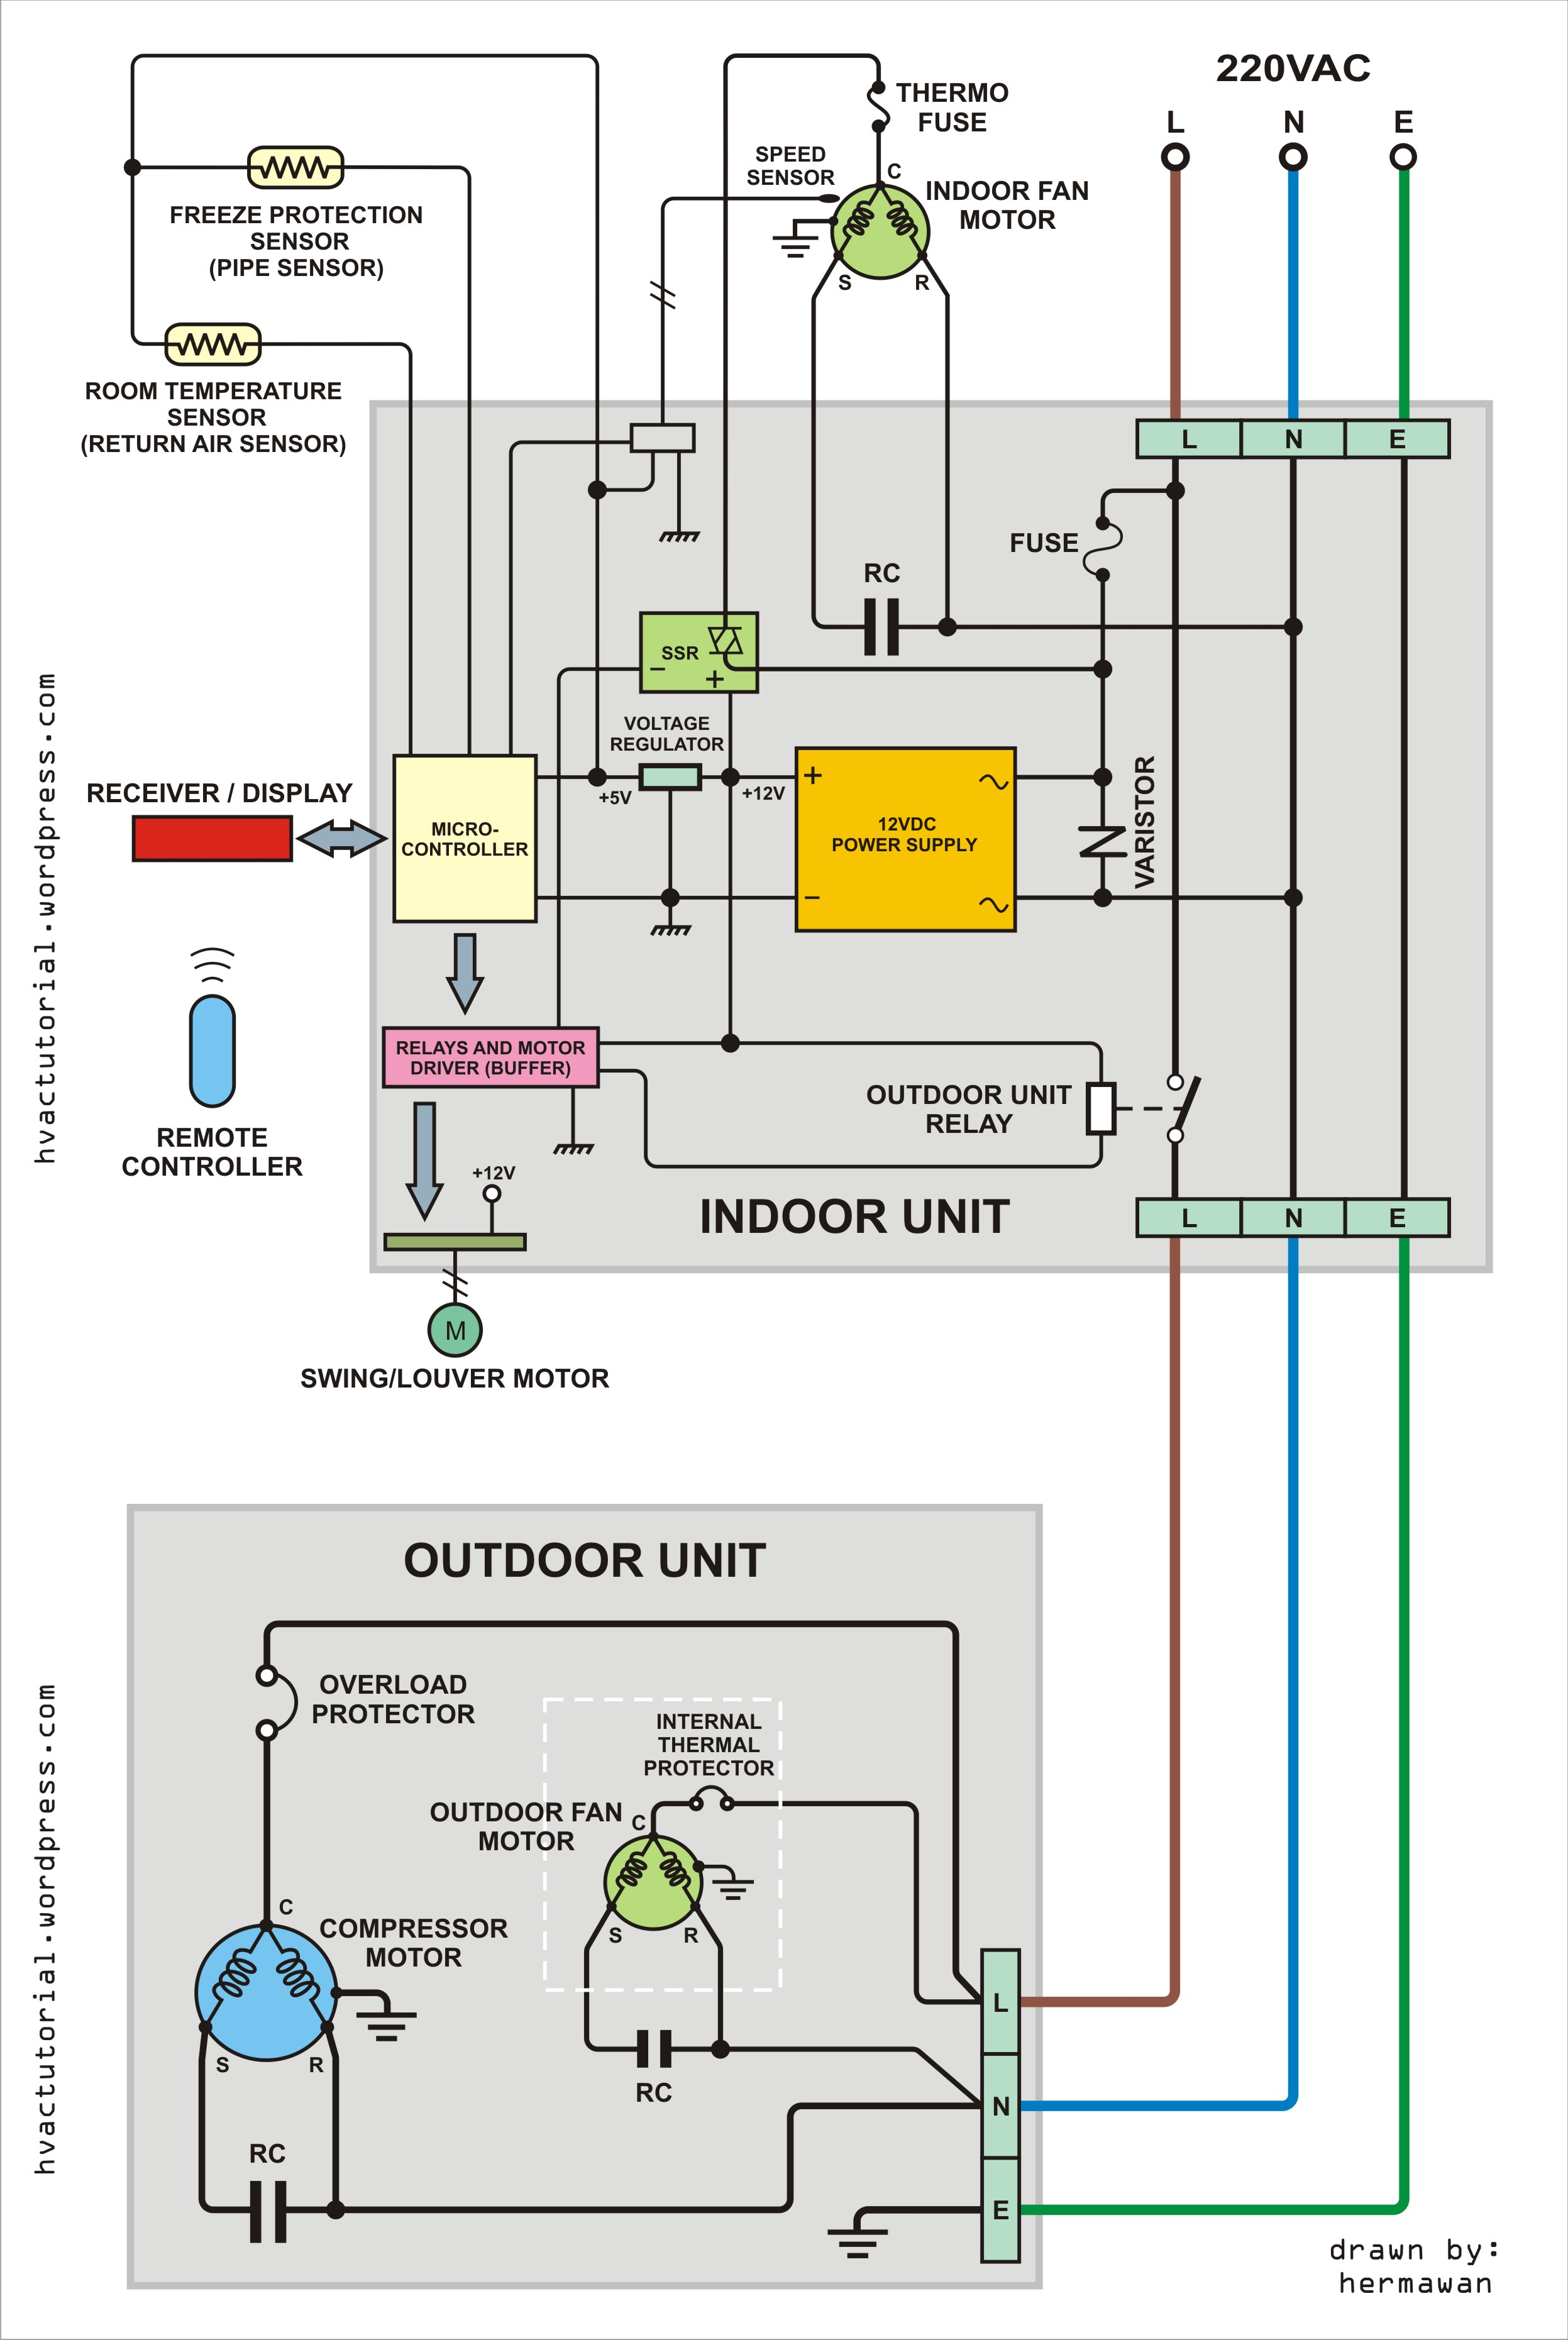 Ac Capacitor Wiring Diagram Wiring Diagram For Ac Wiring Diagram Srconds